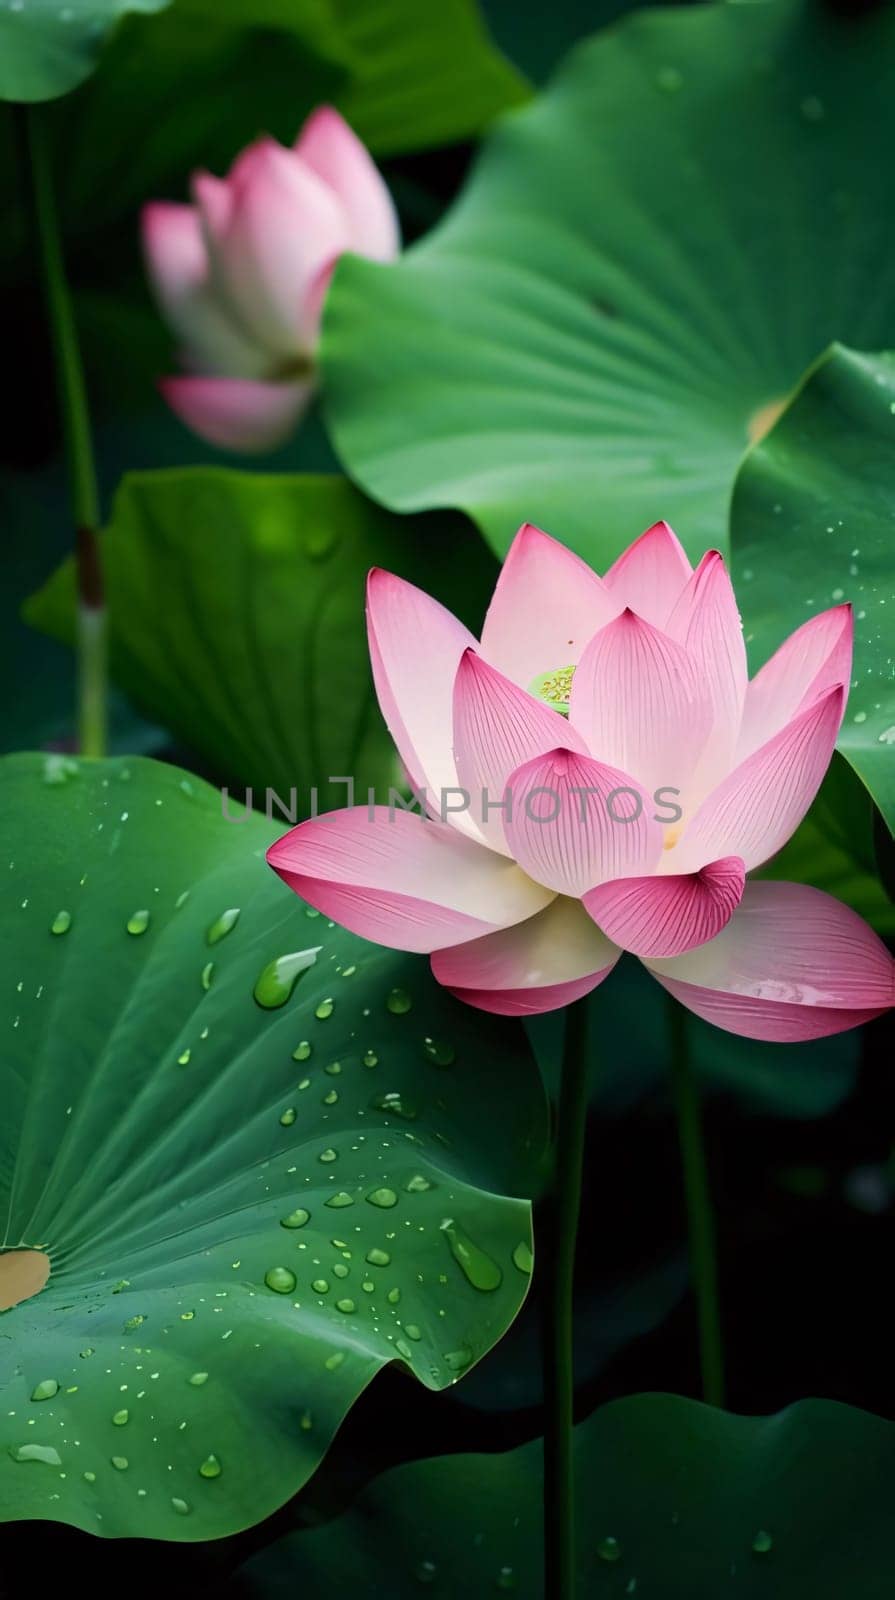 Pink water lilies and green leaves with Drops of water, dew, rain. Flowering flowers, a symbol of spring, new life. A joyful time of nature waking up to life.